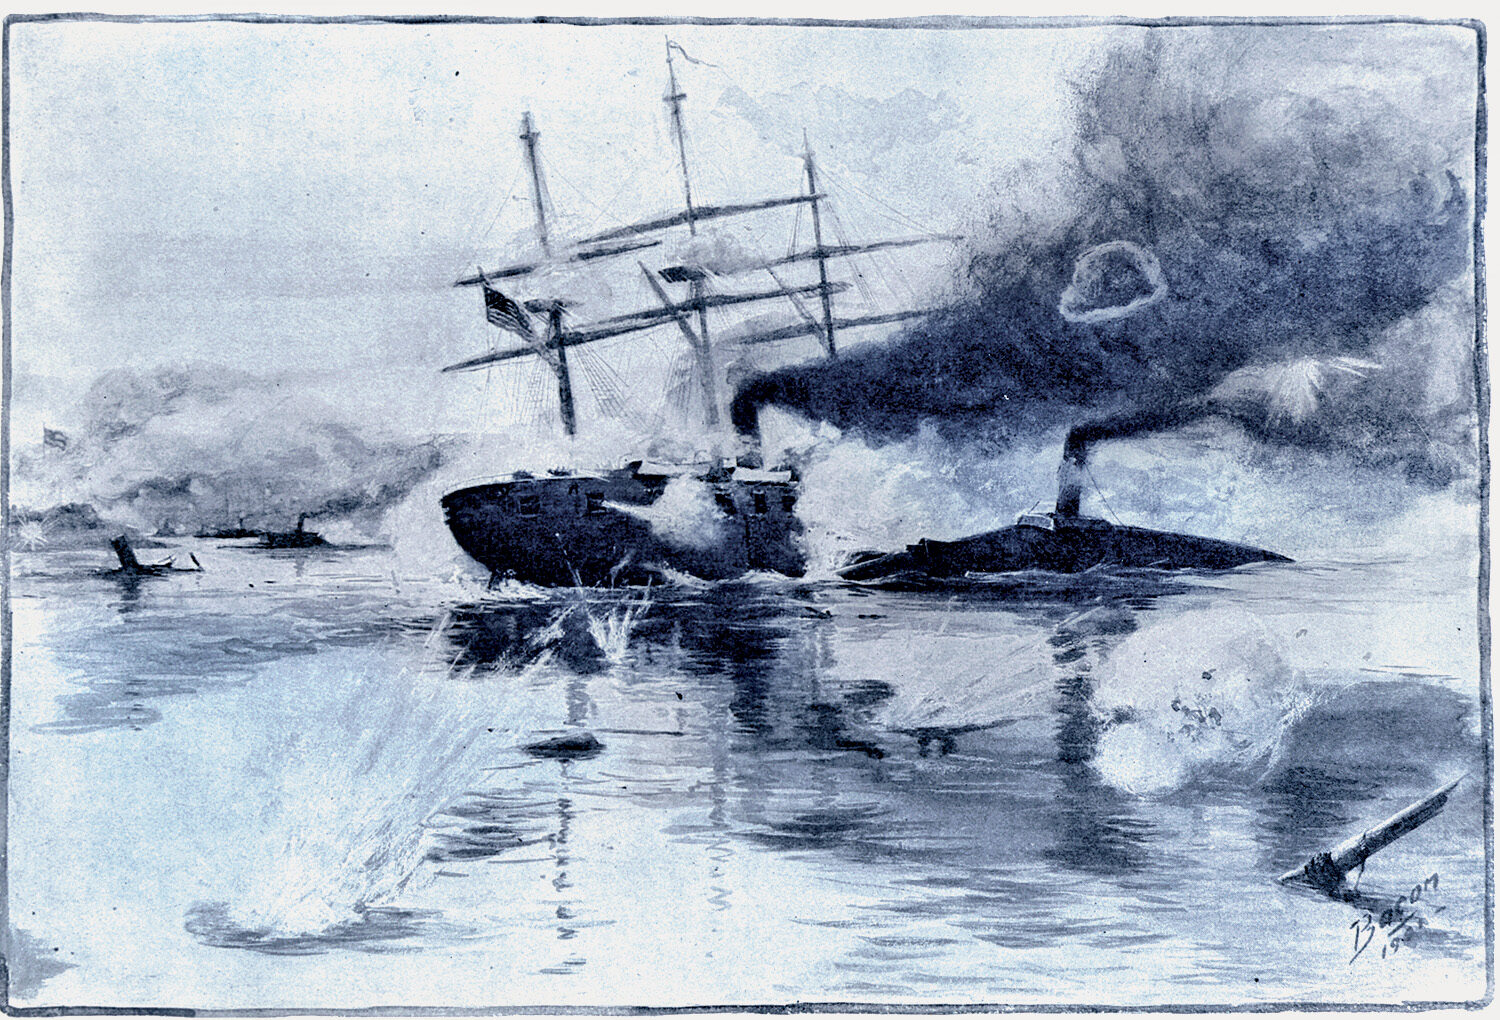 The CSS Manassas rams the USS Brooklyn. The crew of the Confederate ironclad ram fought heroically, damaging the Brooklyn and the USS Mississippi.